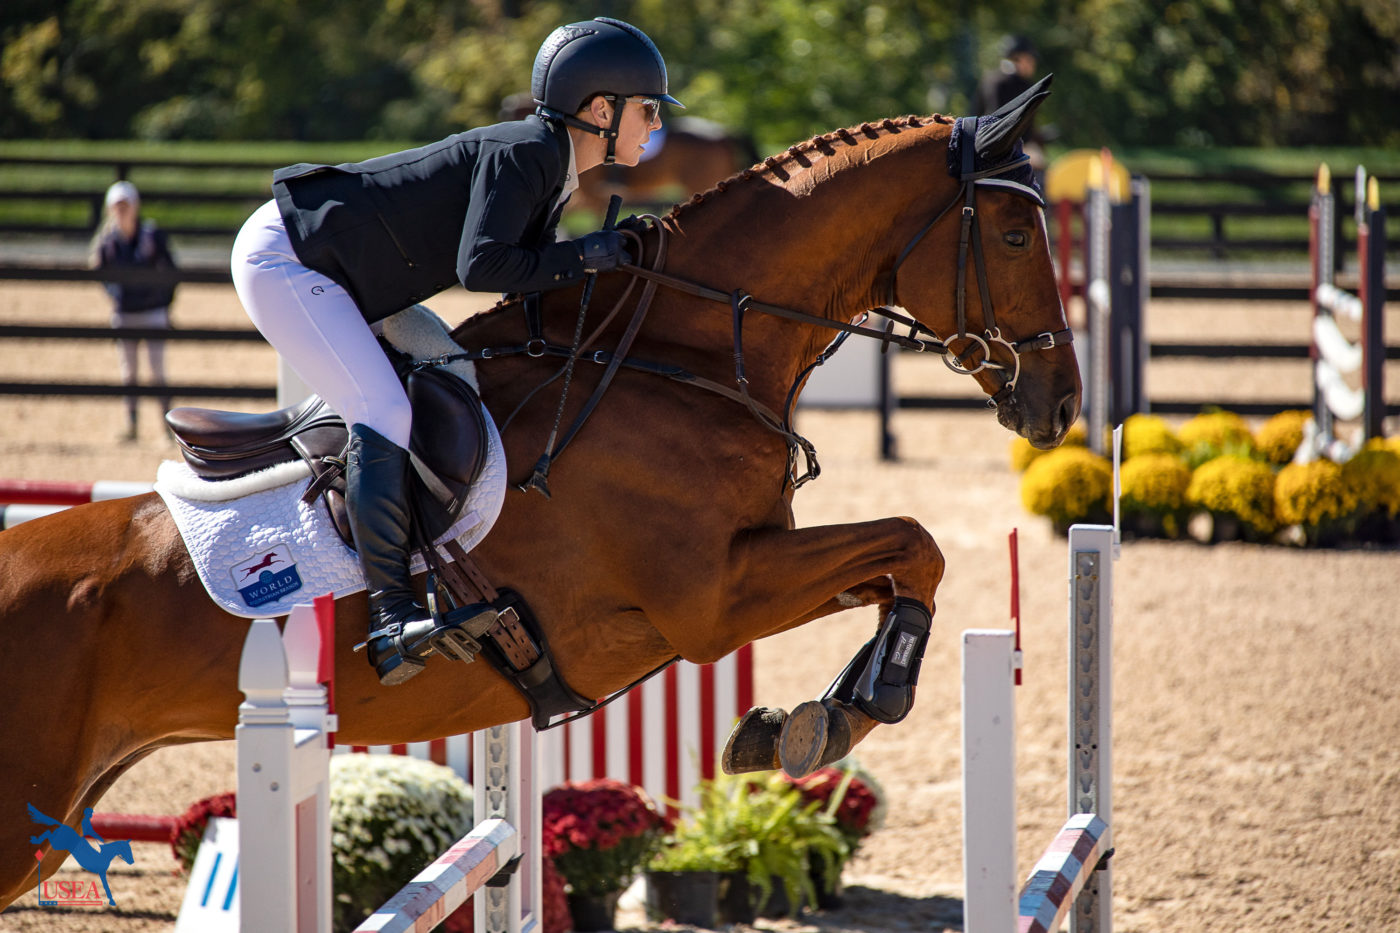 Shannon Lilley and Ideal HX. USEA/ Shanyn Fiske photo